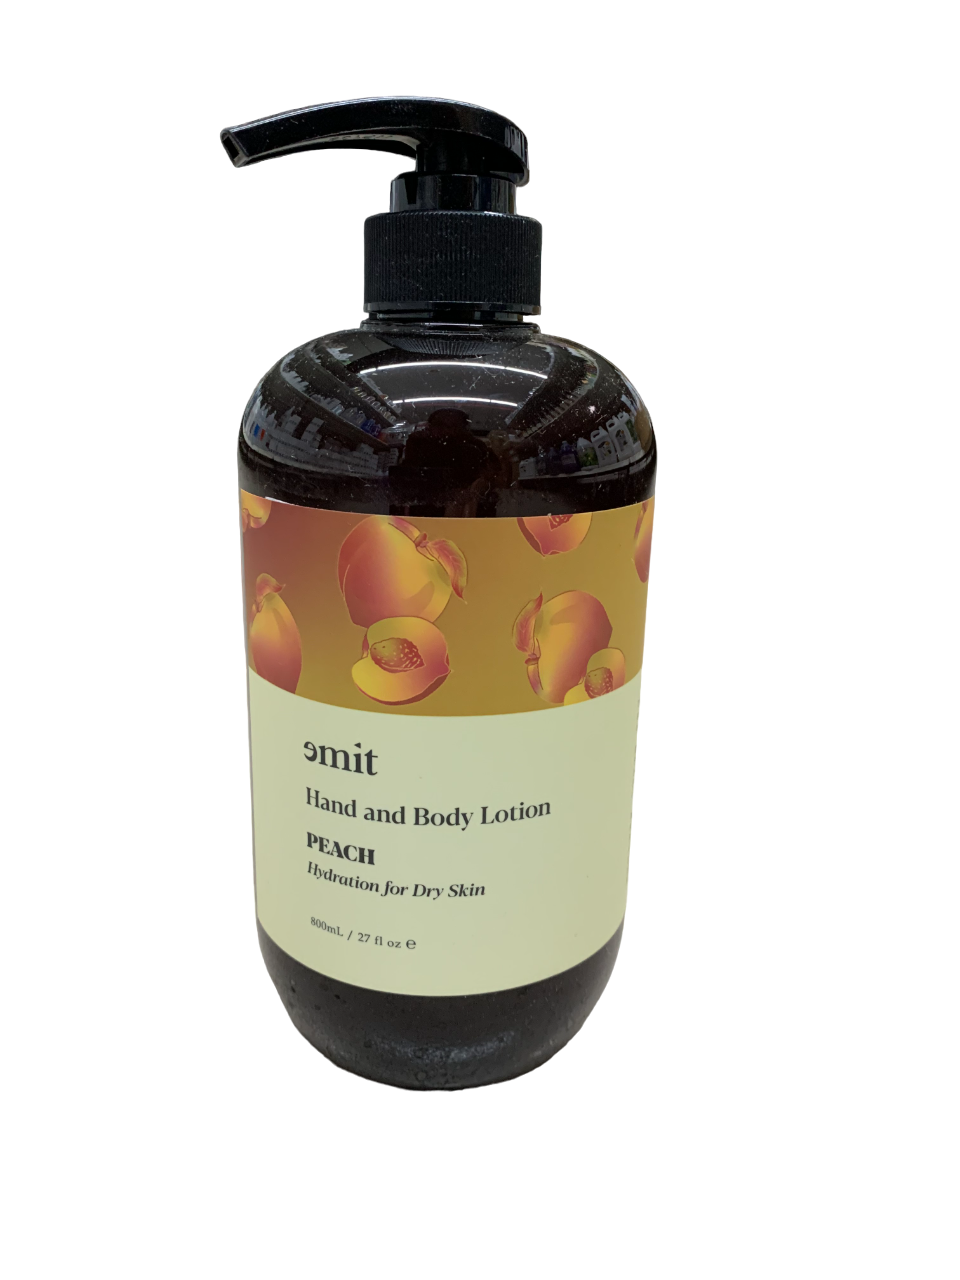 Emit Hand and Body Lotion Peach